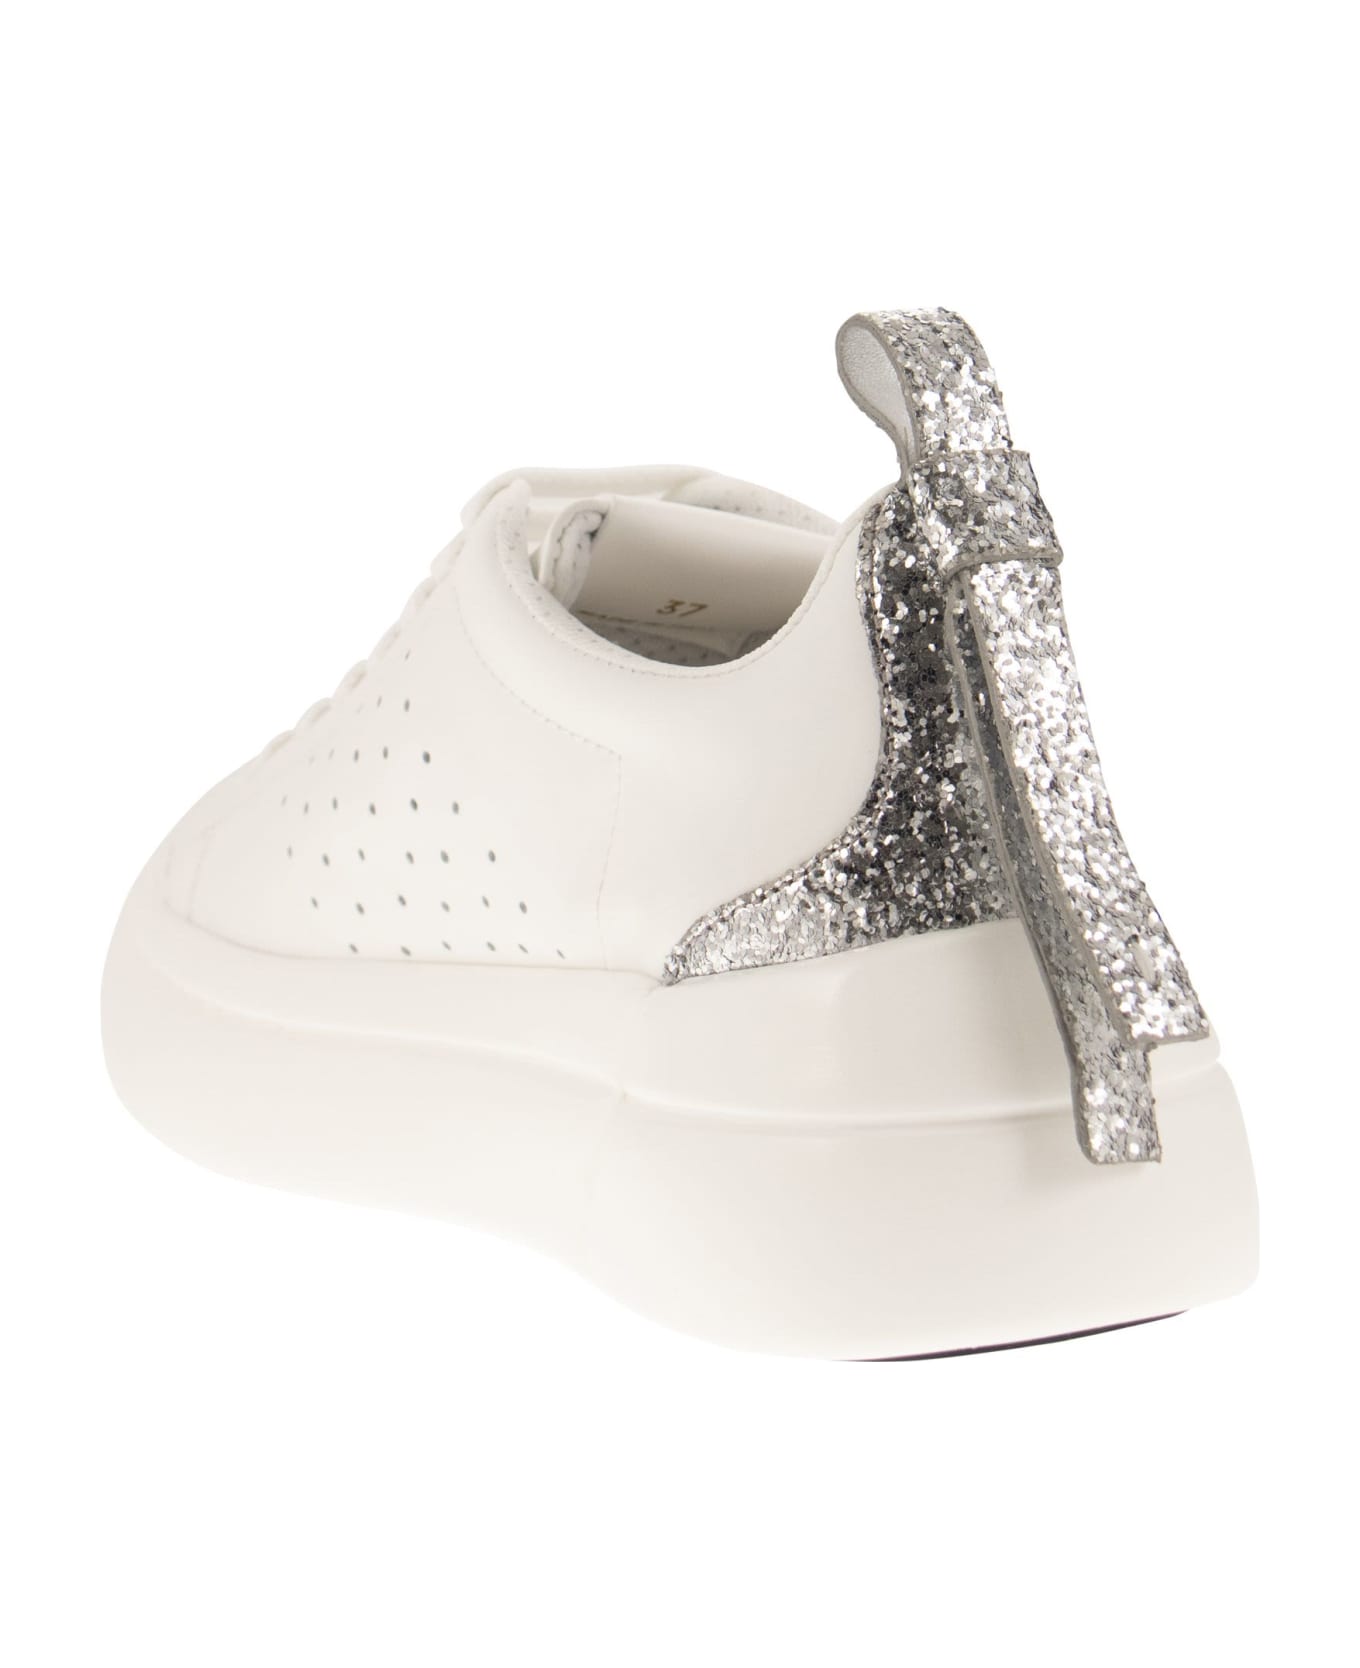 RED Valentino Sneakers Bowalk - White/silver